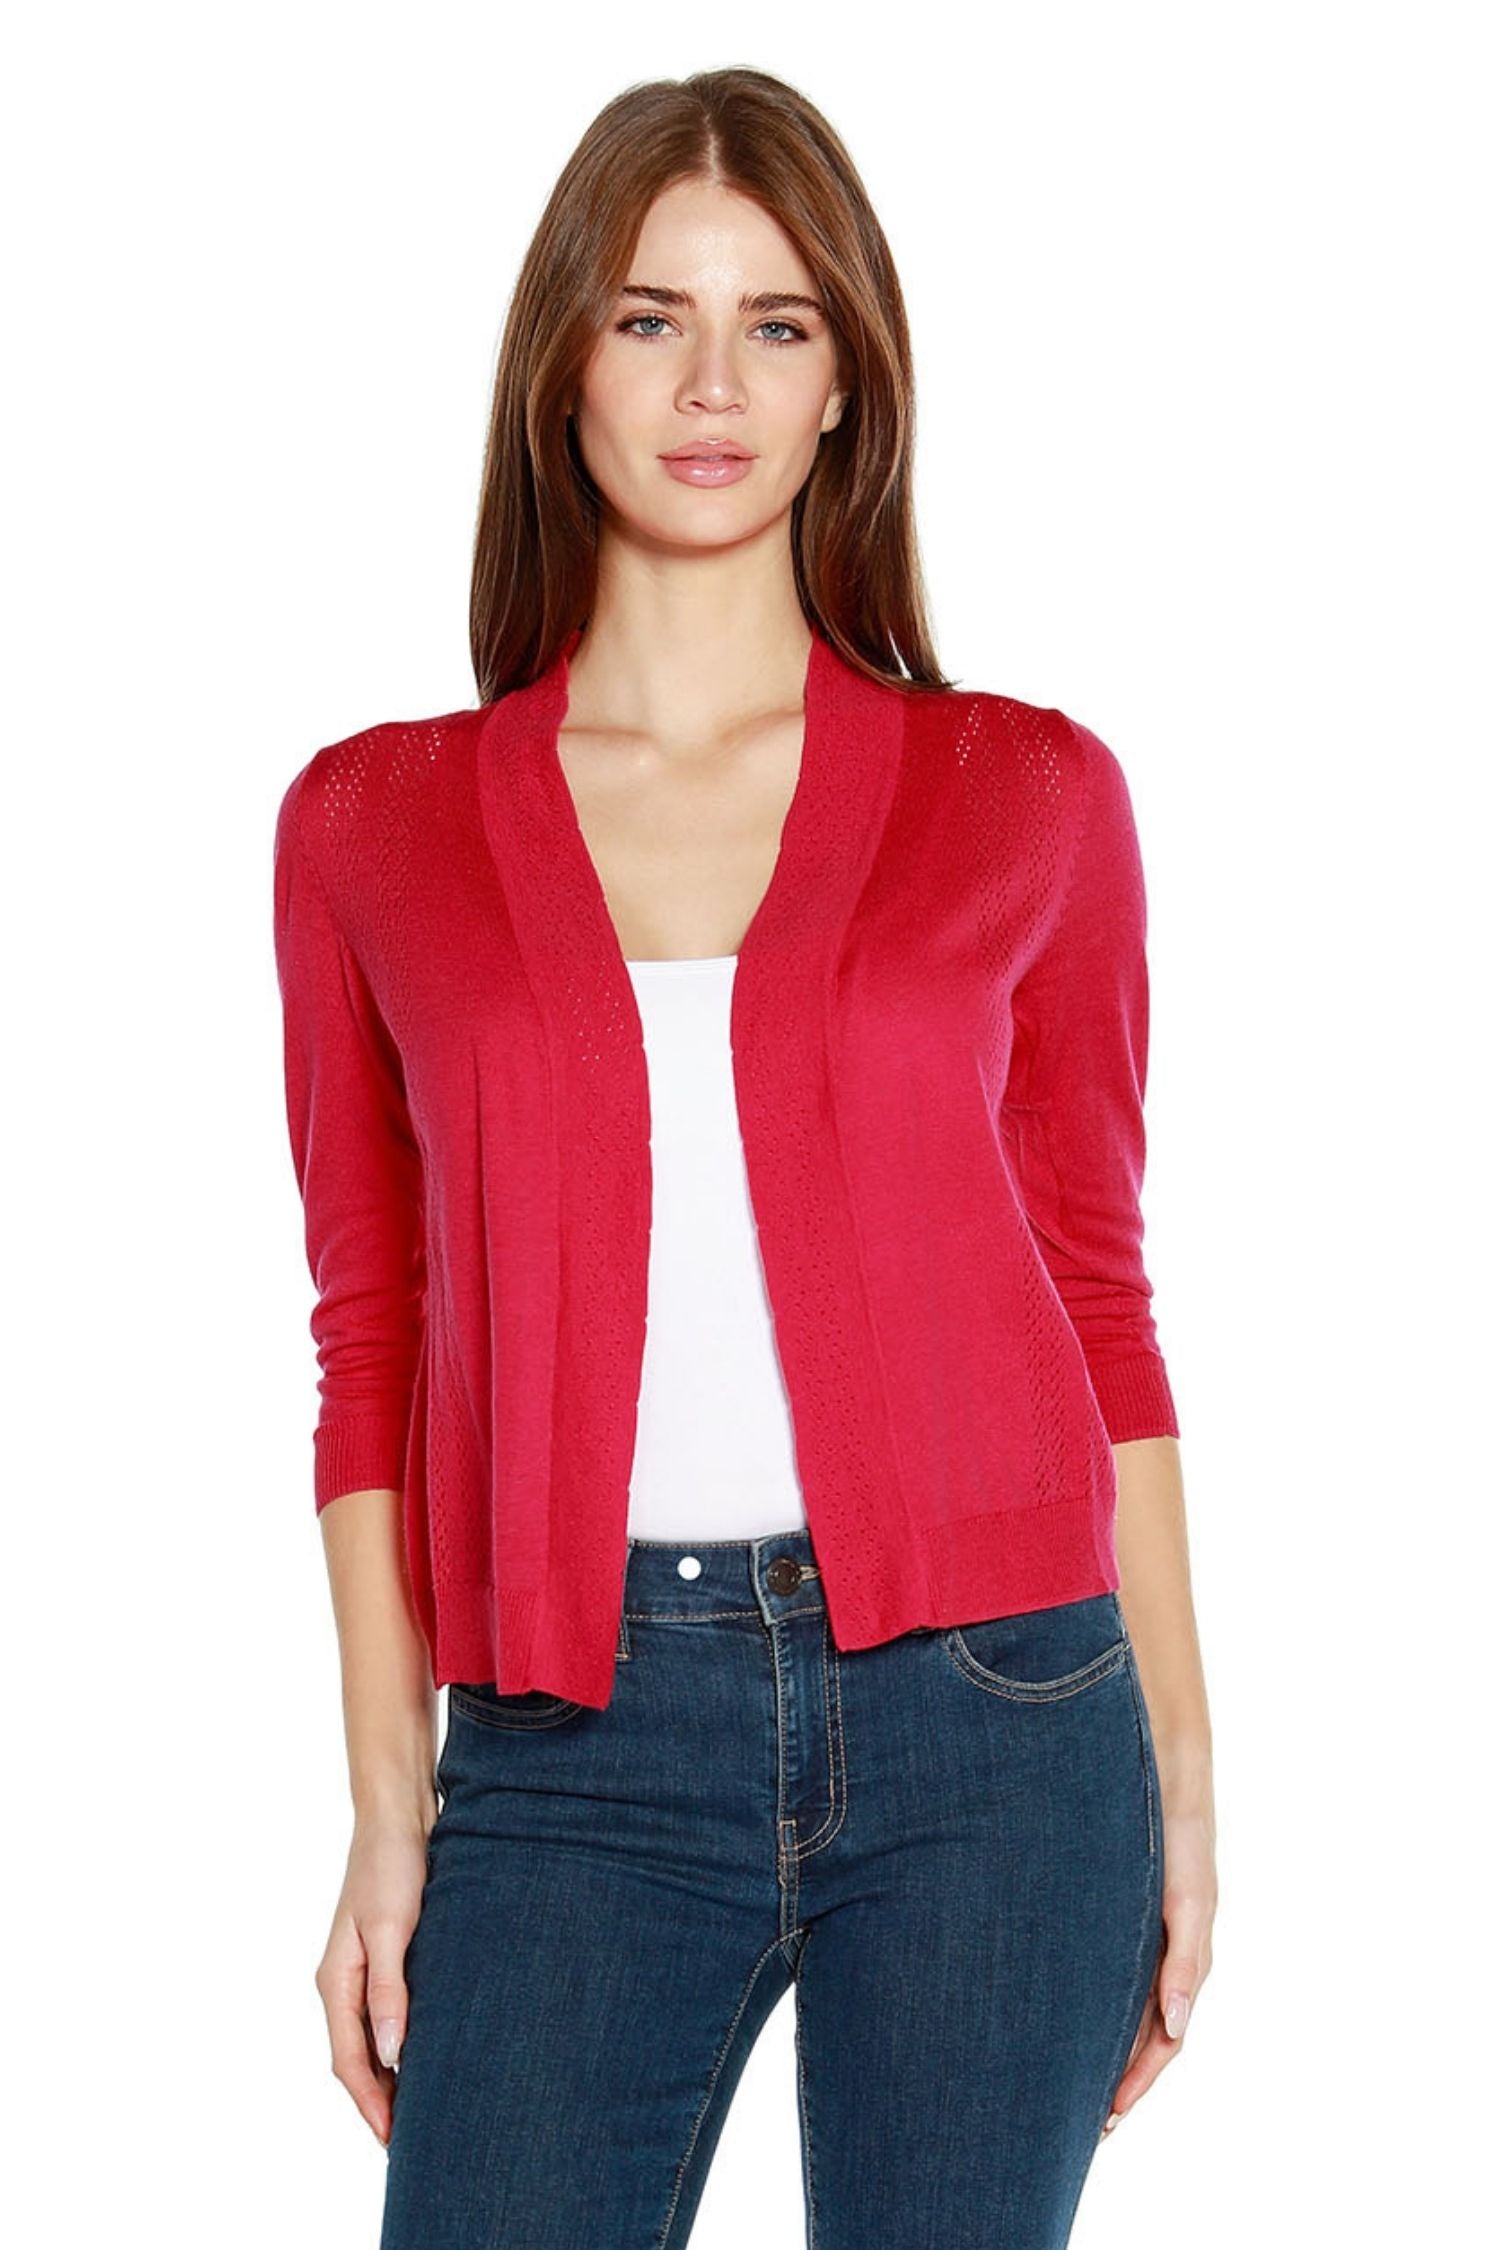 Women’s Cropped Cardigans with 3/4 Sleeves and Pointelle Stitch